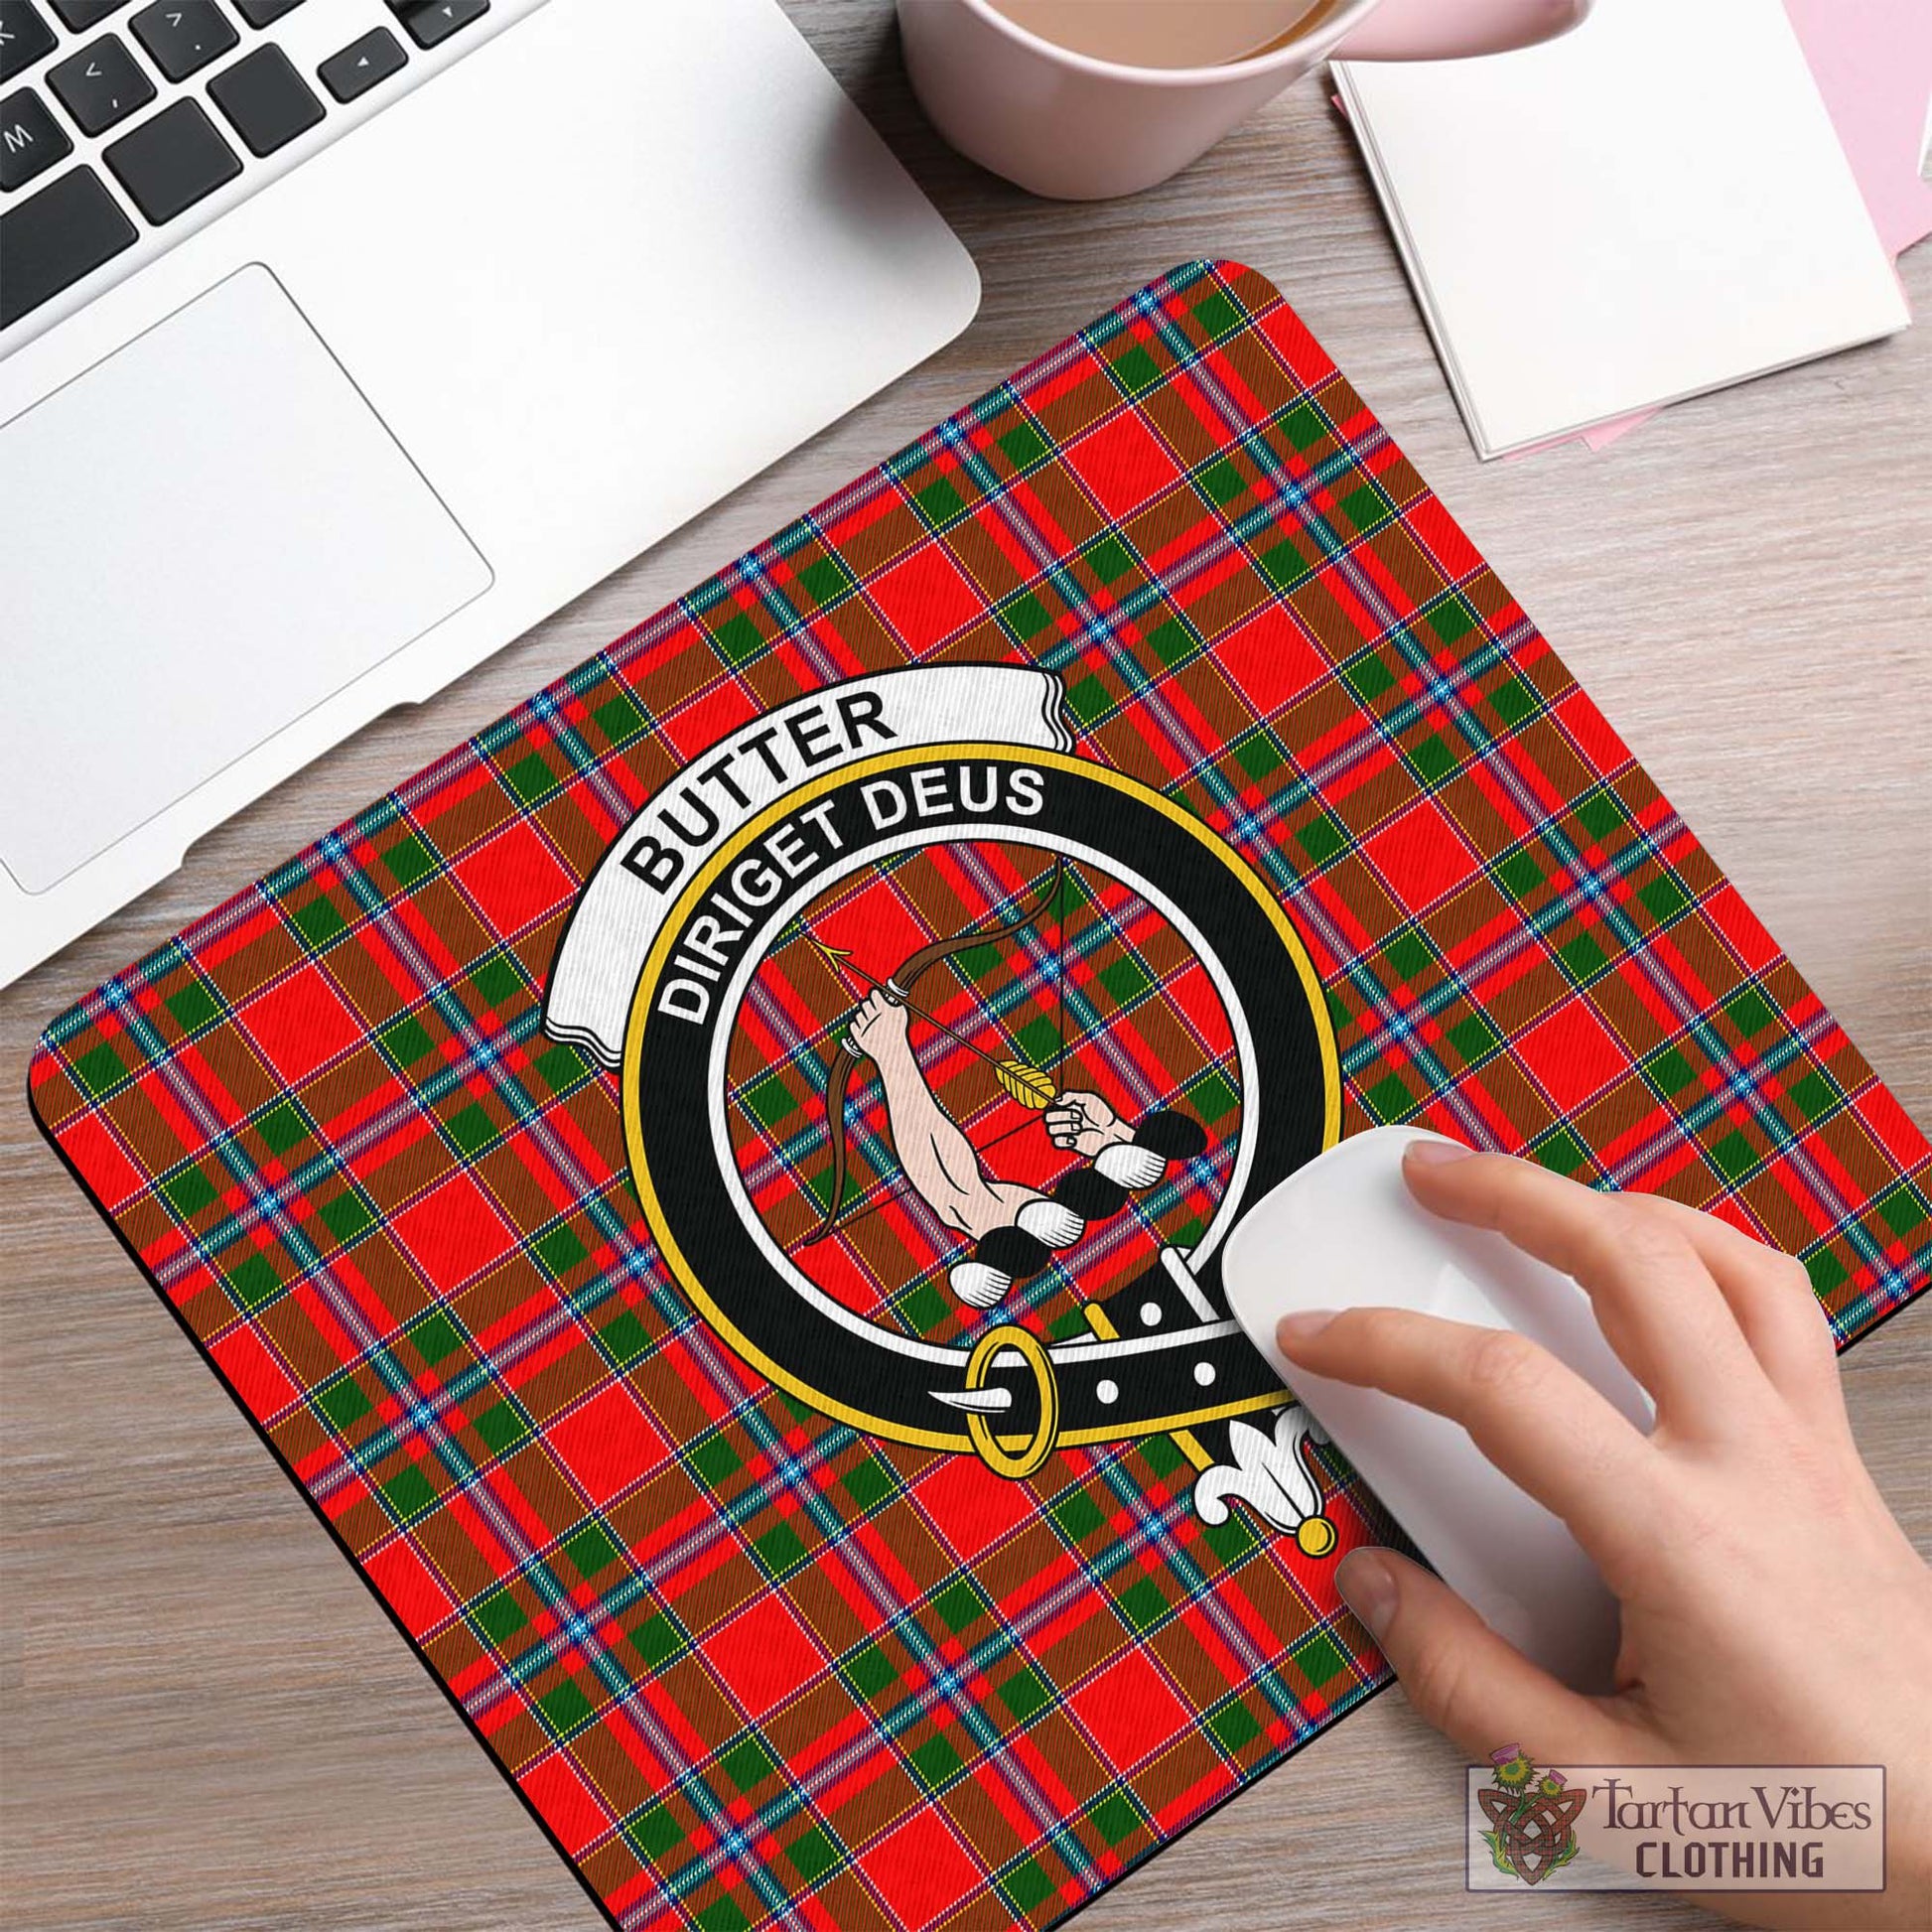 Tartan Vibes Clothing Butter Tartan Mouse Pad with Family Crest